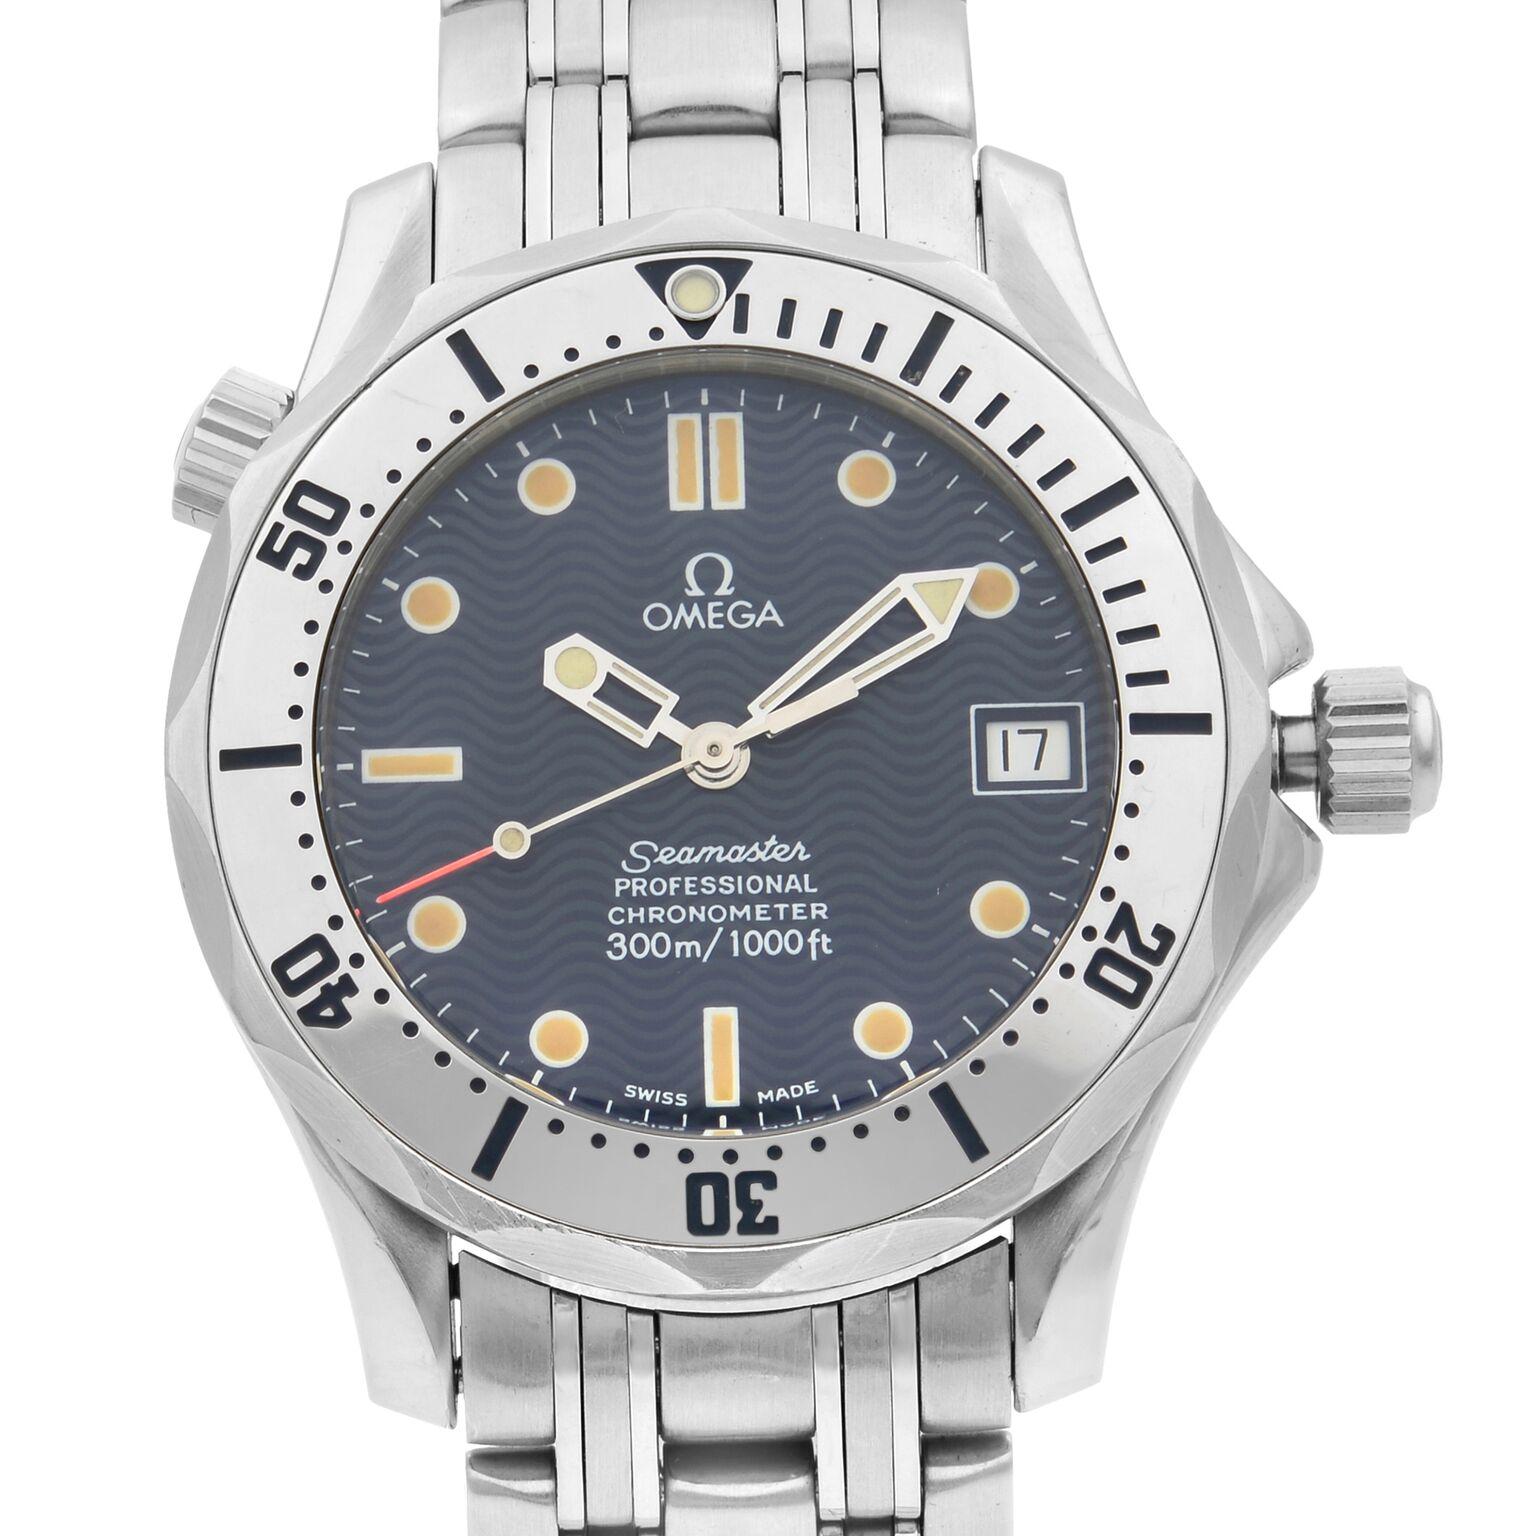 This pre-owned Omega Seamaster 2552.80.00 is a beautiful men's timepiece that is powered by mechanical (automatic) movement which is cased in a stainless steel case. It has a round shape face, date indicator dial and has hand sticks & dots style